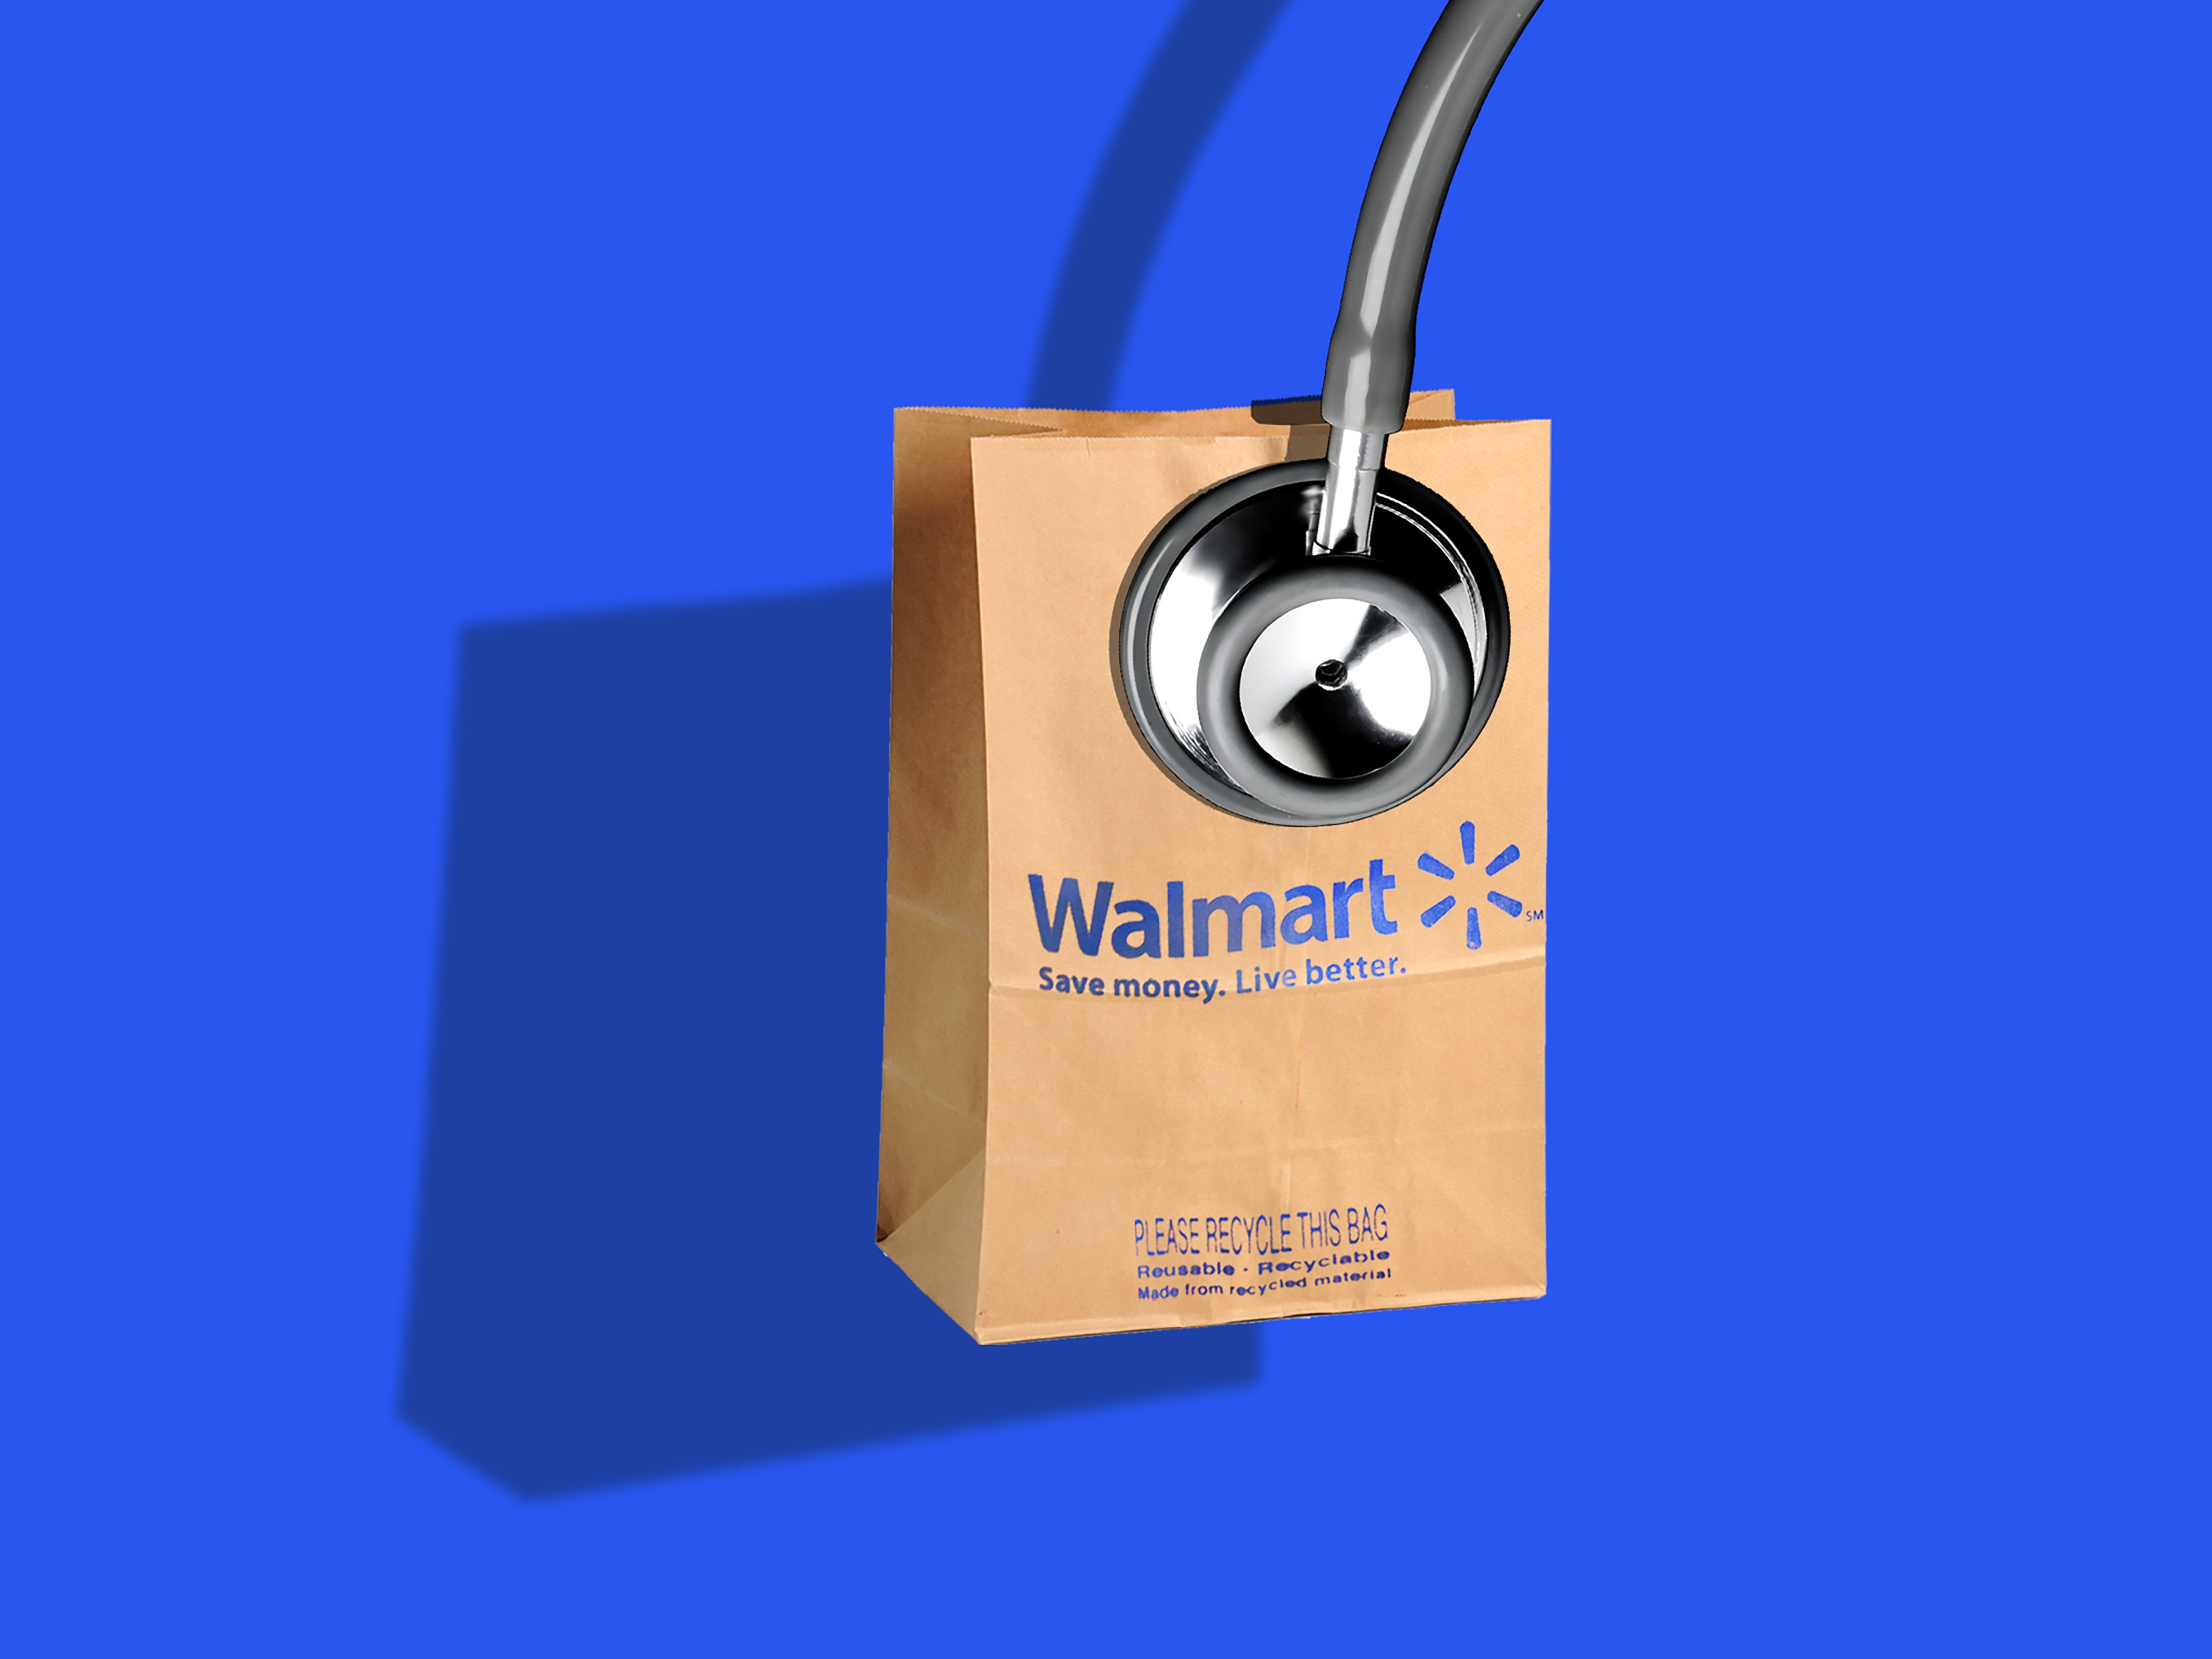 Walmart Wants to Bring Its 'Everyday Low Prices' to Health